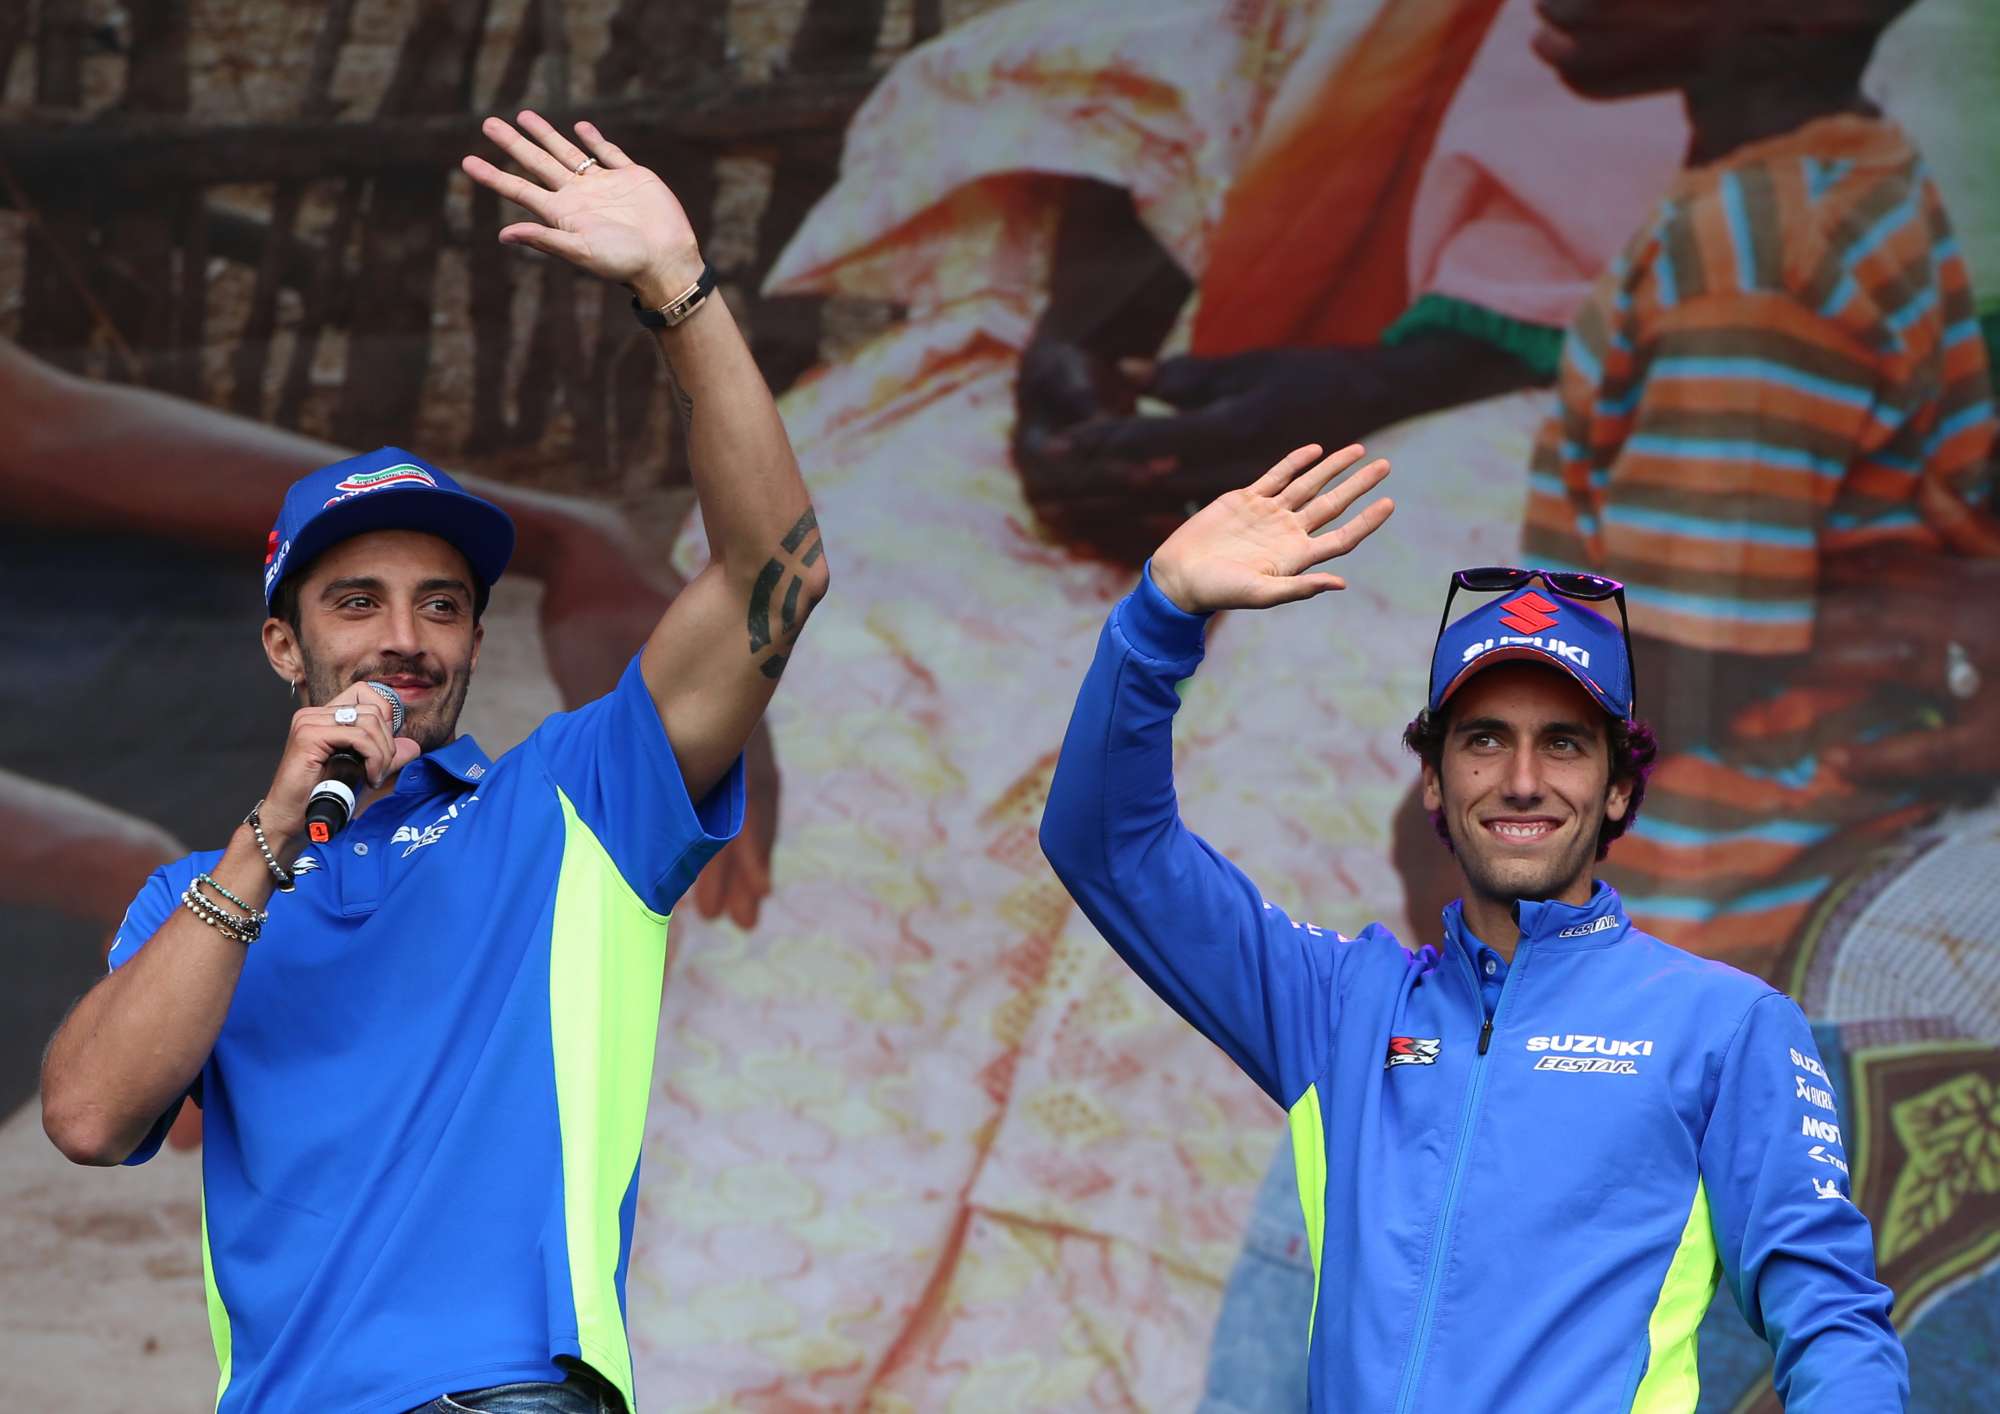 Andrea Iannone Alex Rins Silverstone Day of Champions Two Wheels for Life MotoGP